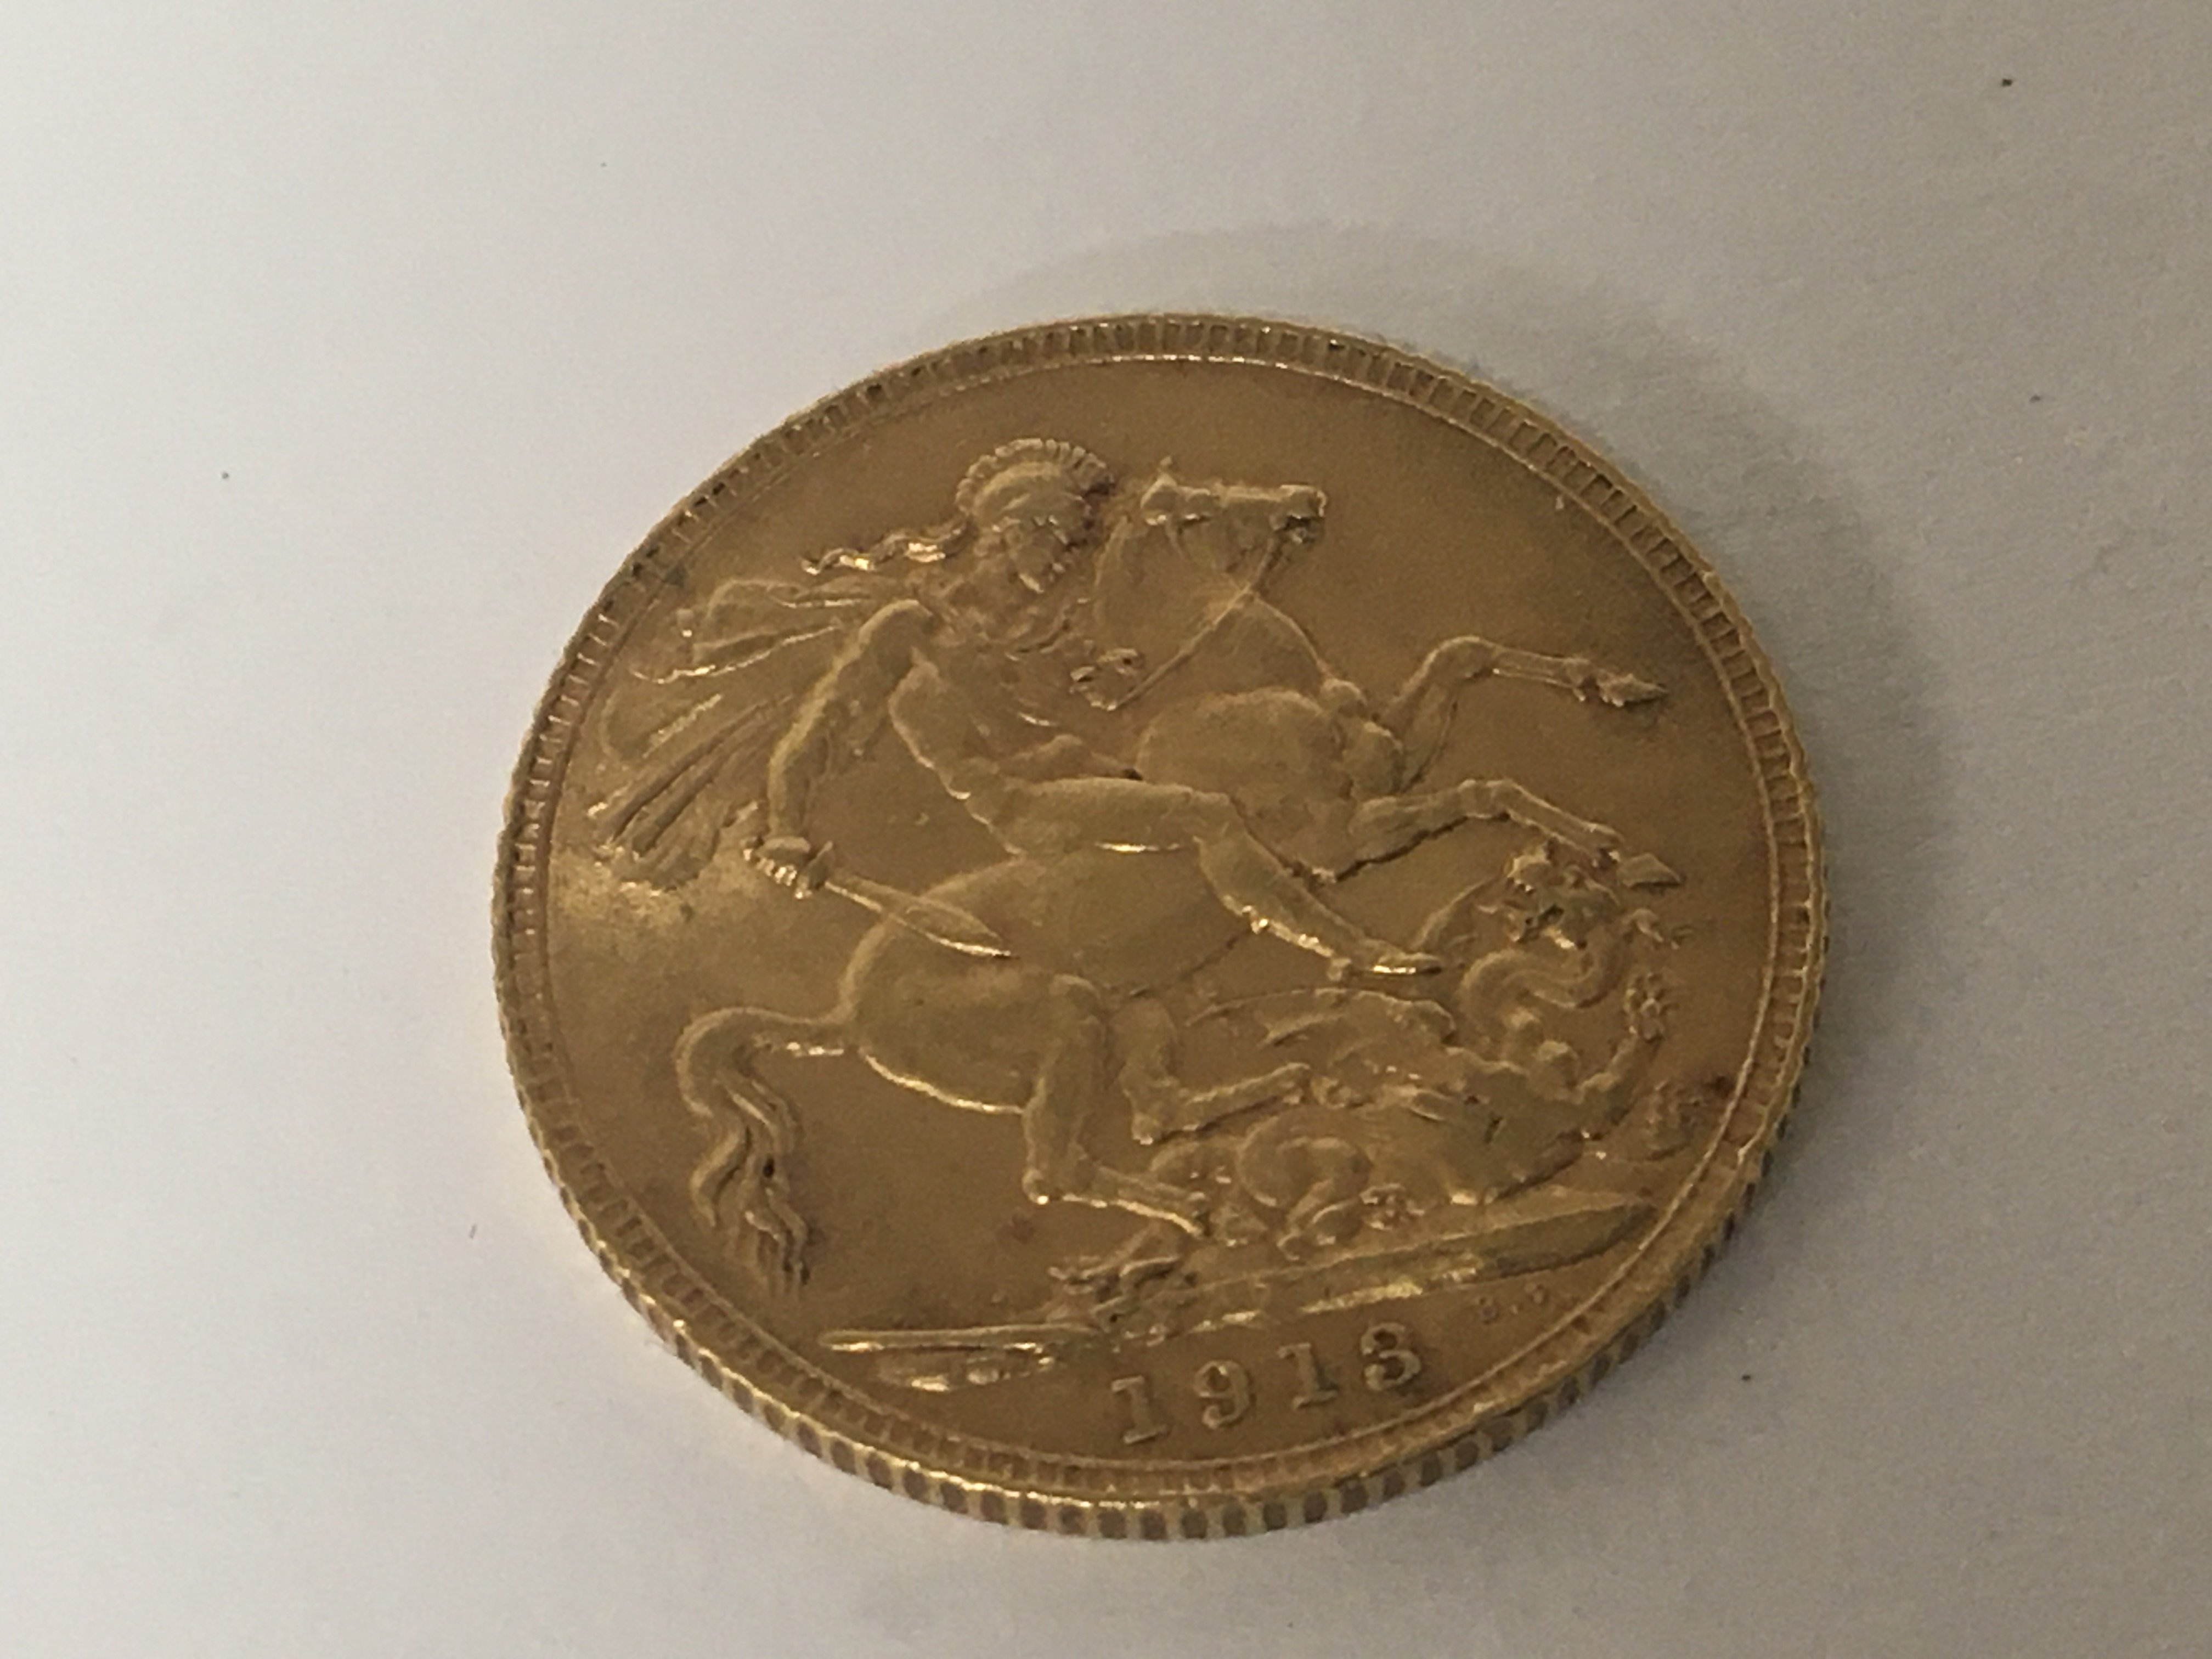 A 1913 George V Gold Sovereign.